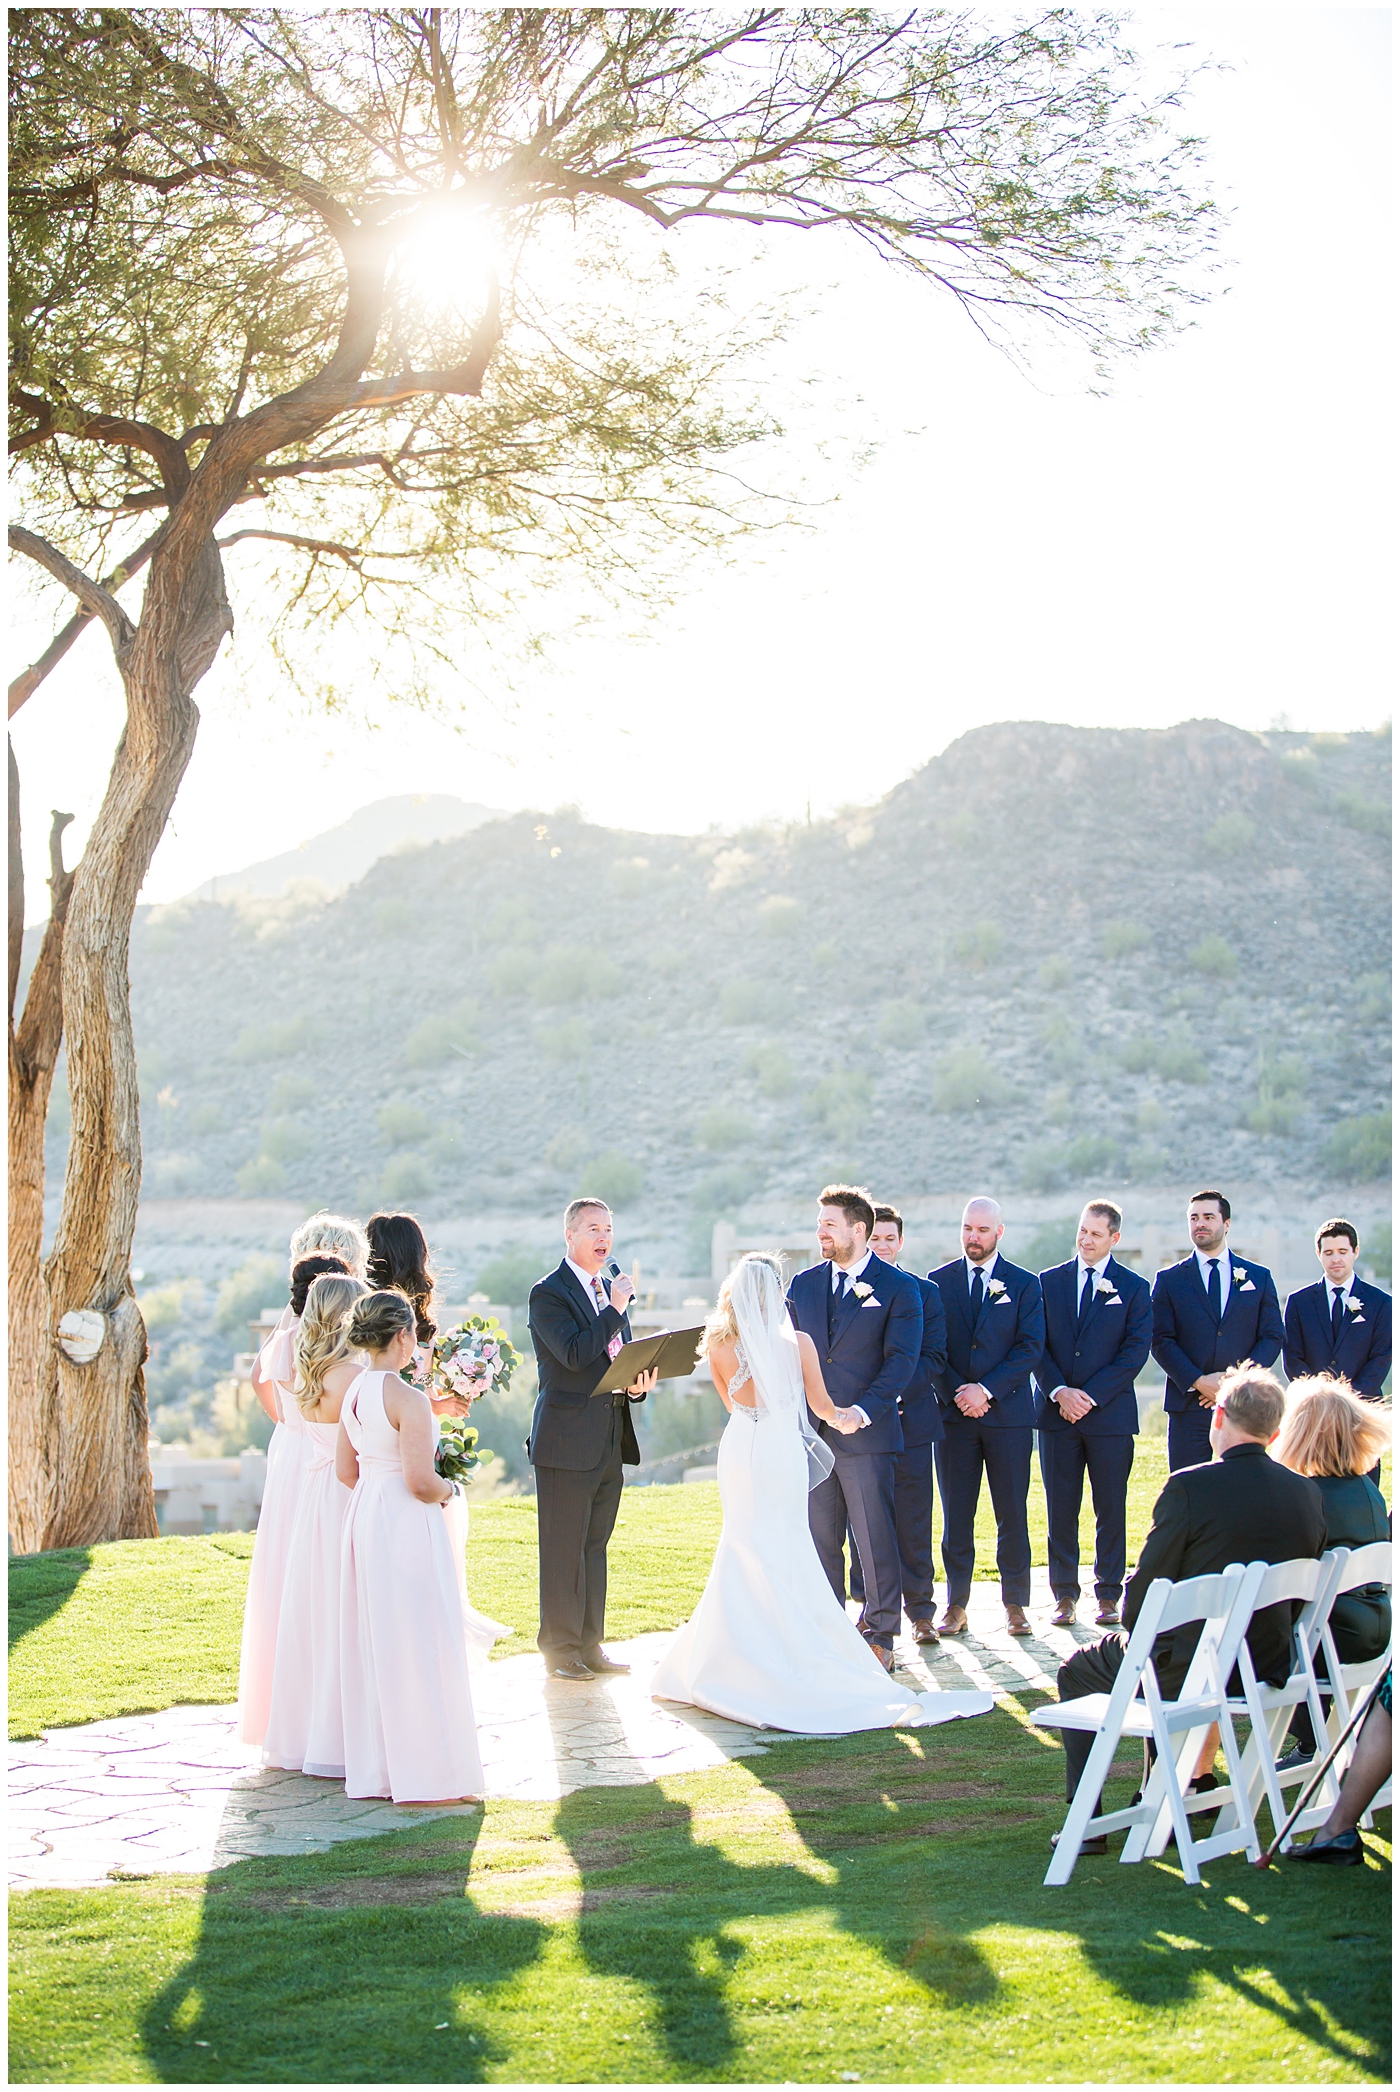 gorgeous bride with side swept hair in racerback pronovias dress and blush pink, white rose and eucalyptus greenery wedding bouquet with groom in navy suit and tie couple portrait at wedding ceremony outside